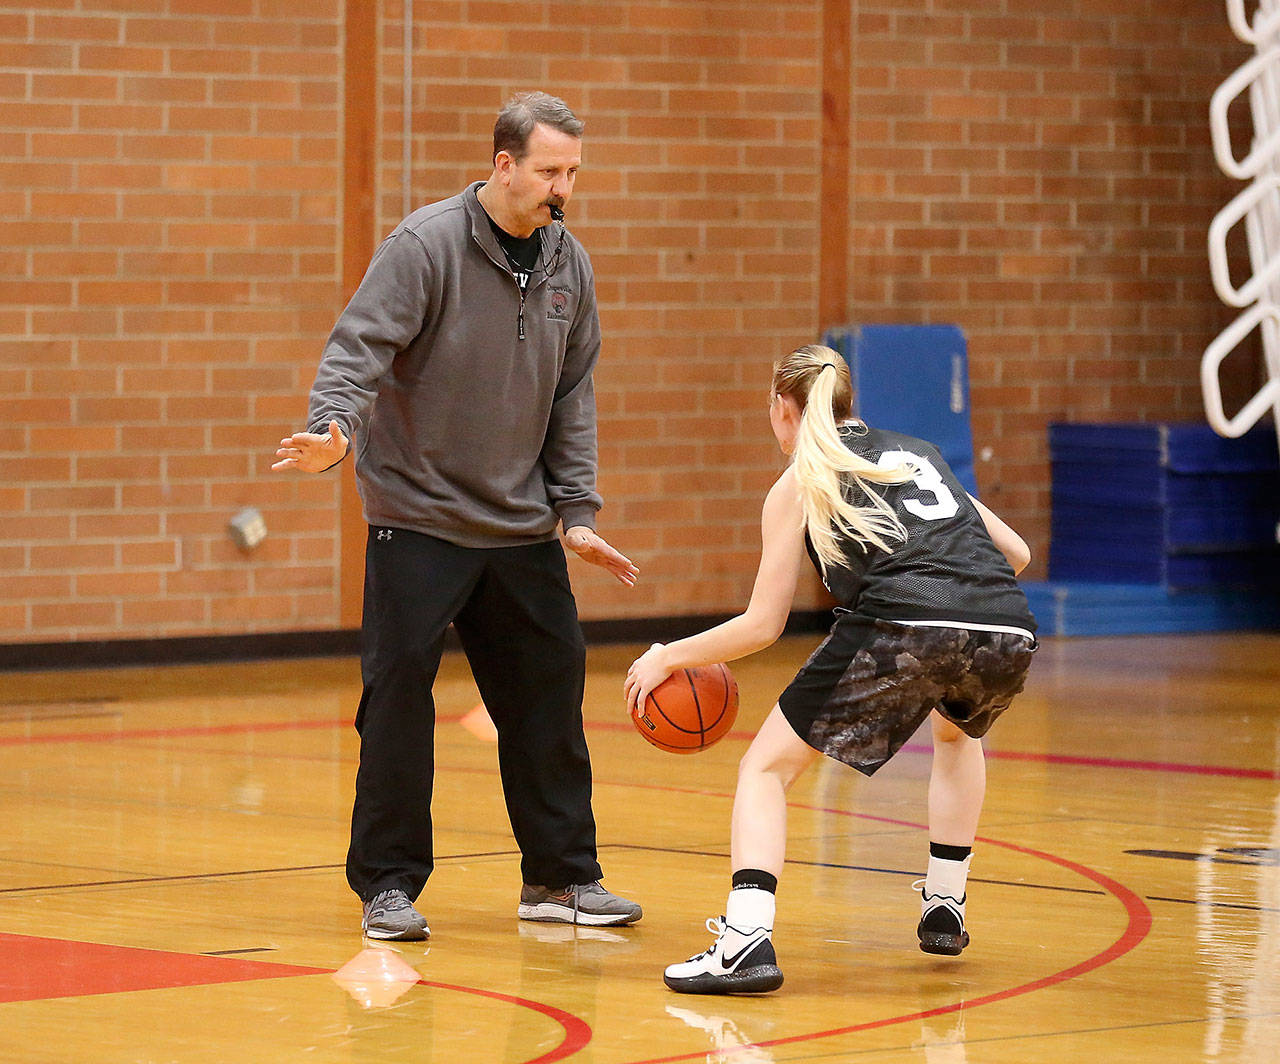 New Coupeville coach Scott Fox helps out in a drill during practice Tuesday. (Photo by John Fisken)